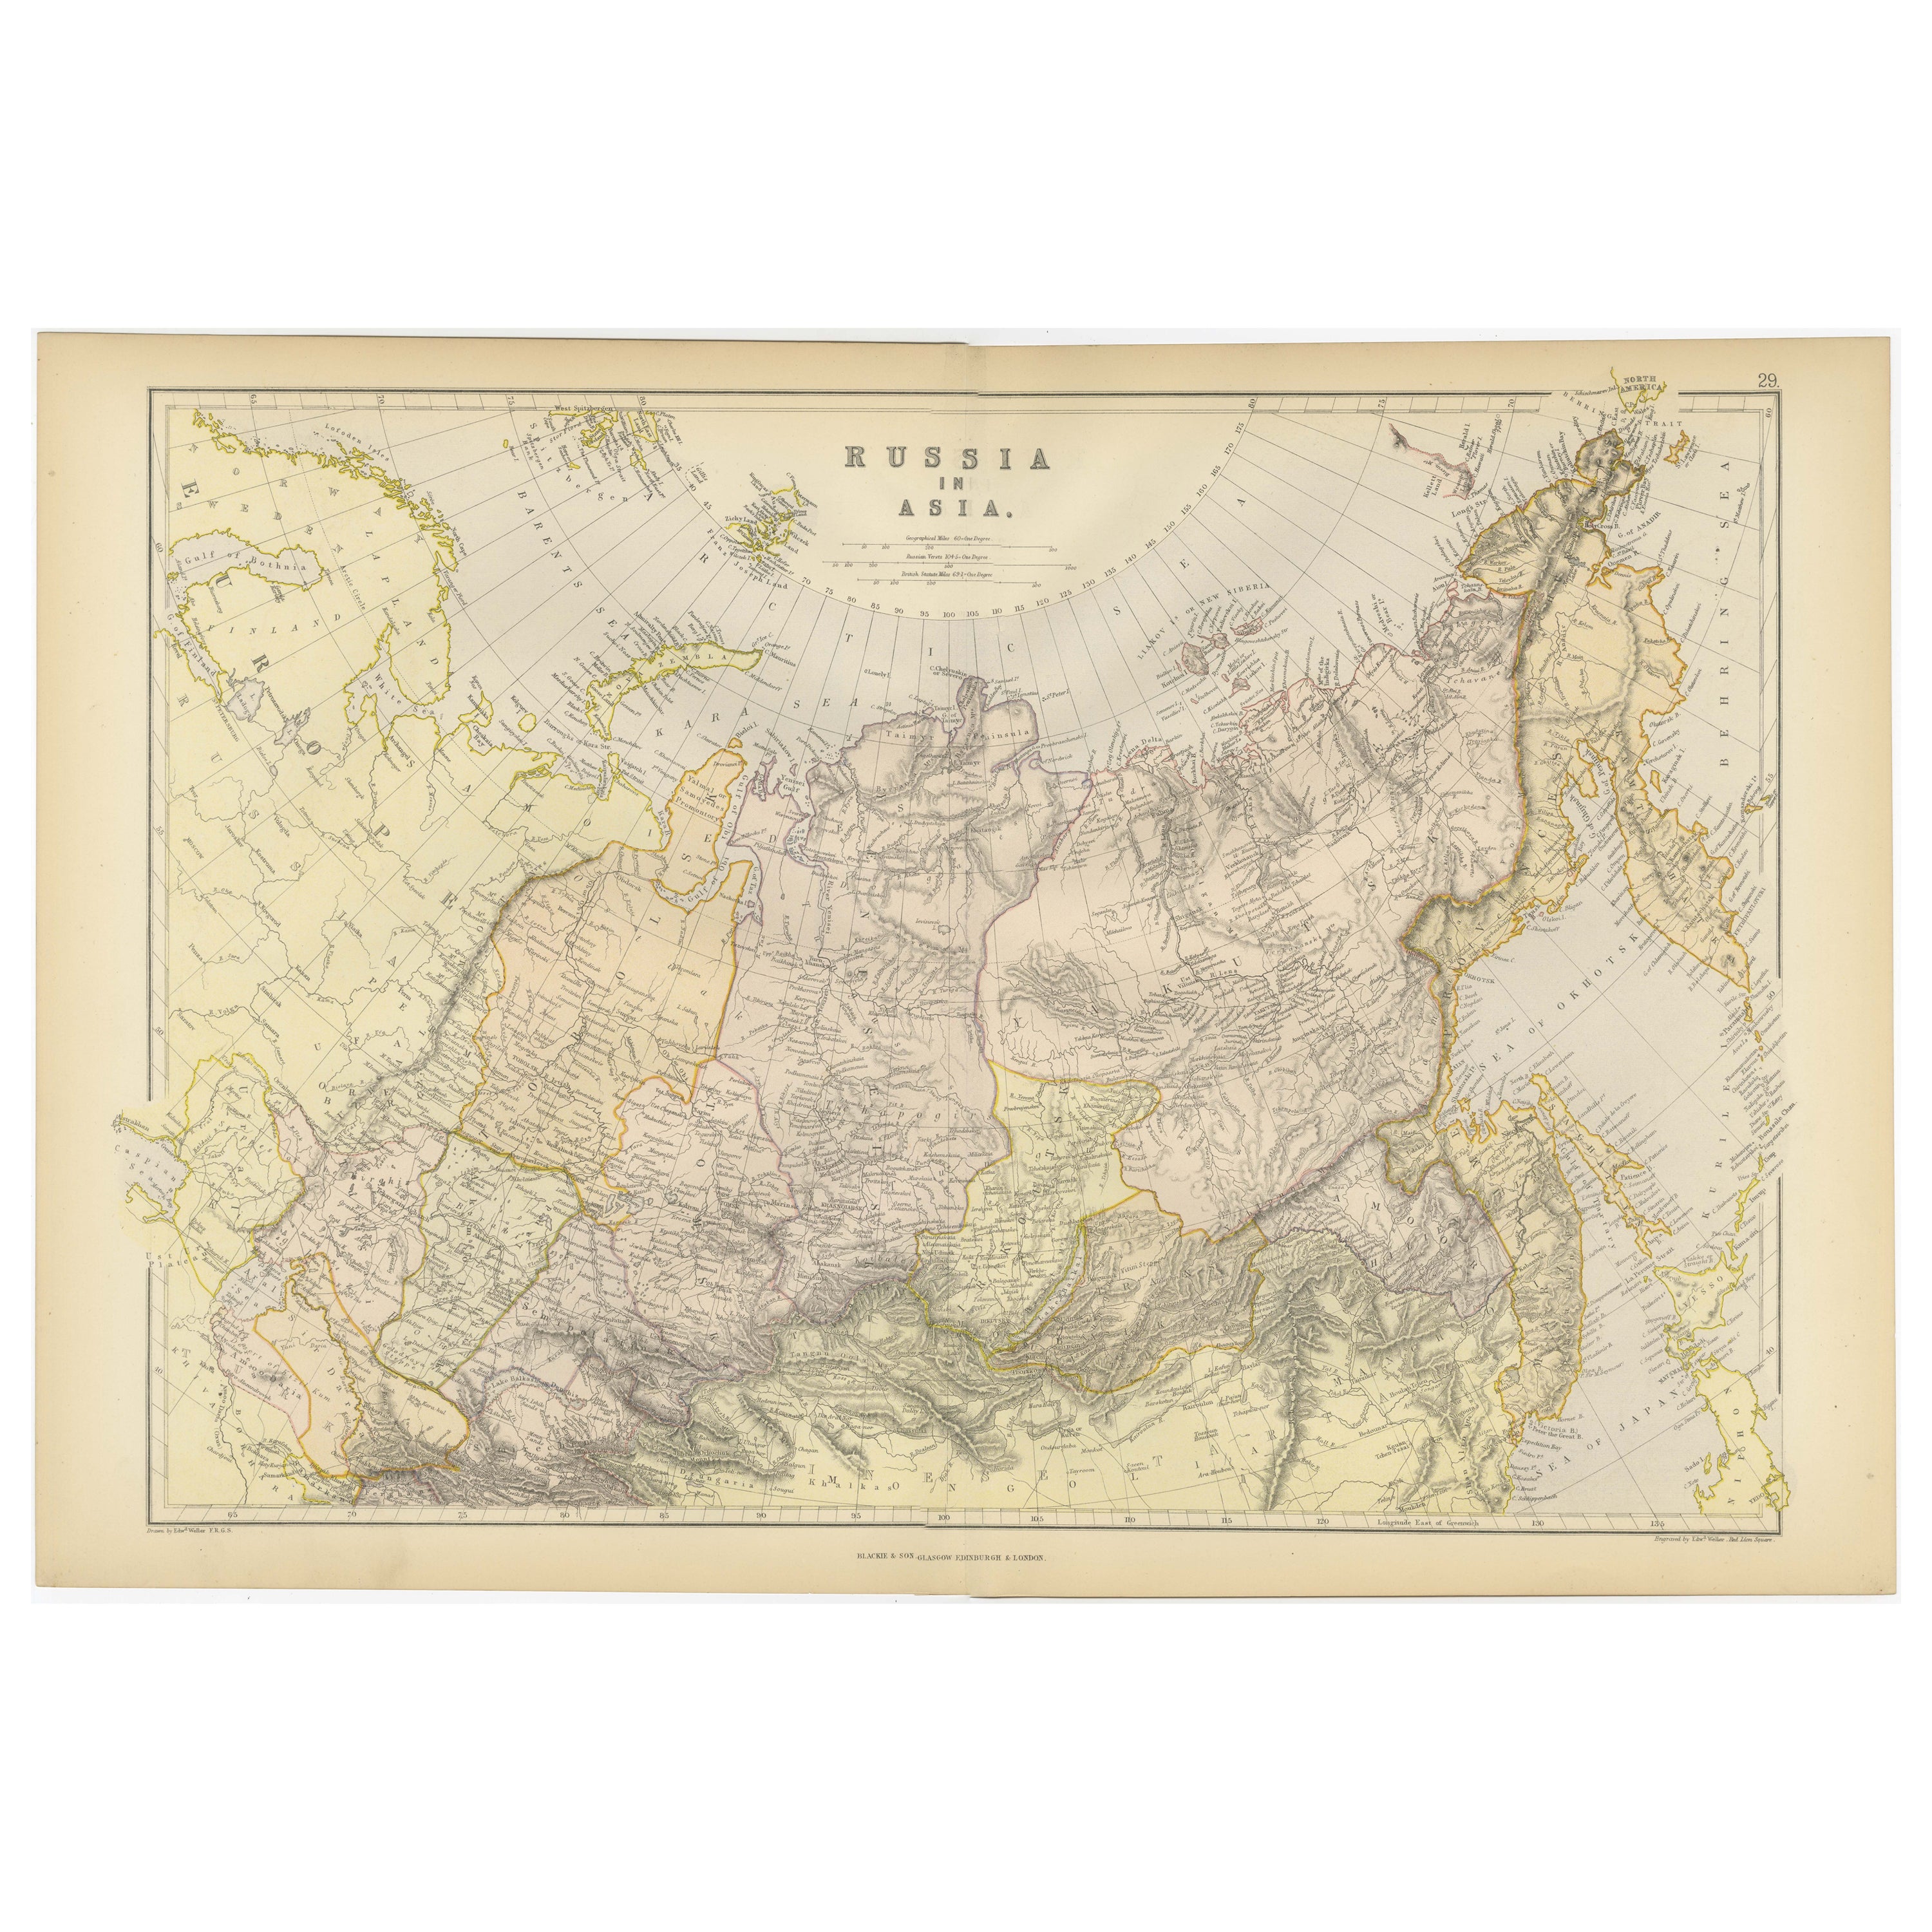 Detailed Antique Cartography of Asian Russia, 1882